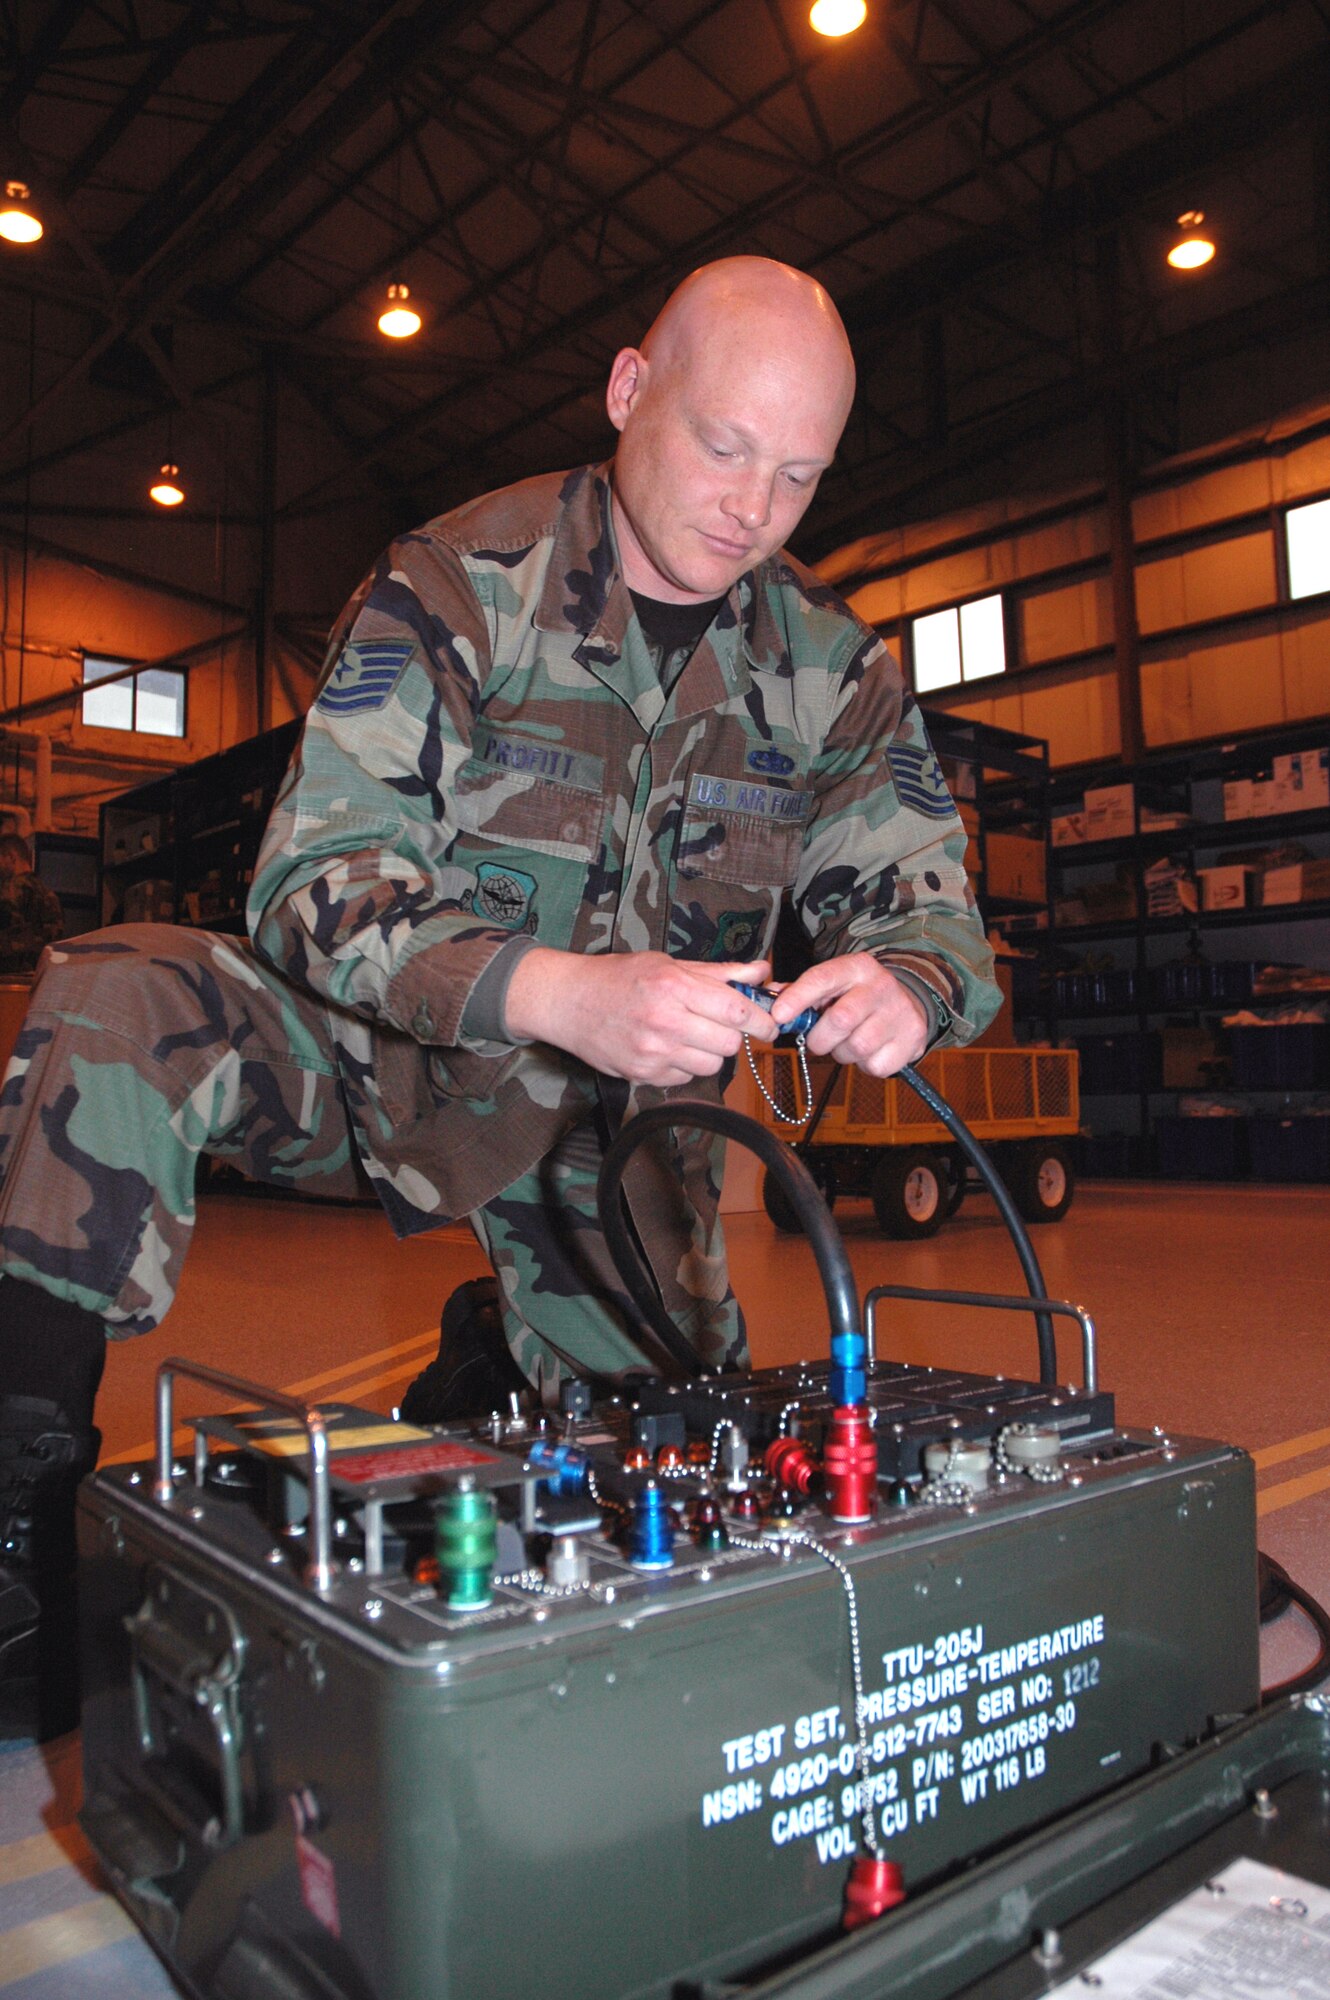 Tech. Sgt. Matthew Profitt inspects a TTV-205 pressure tester that checks the C-5's pitot-static system for leaks. A pitot-static system supplies air pressure sensations directly to differential pressure flight instruments for the measurement of aircraft speed and altitude. In 2003, the Dover Air Force Base reservist's leg was amputated when he was diagnosed with epithelioid sarcoma, a malignant soft tissue tumor. He is a 512th Aircraft Maintenance Squadron guidance and control section technician. (U.S. Air Force photo/1st Lt. Marnee A.C. Losurdo)